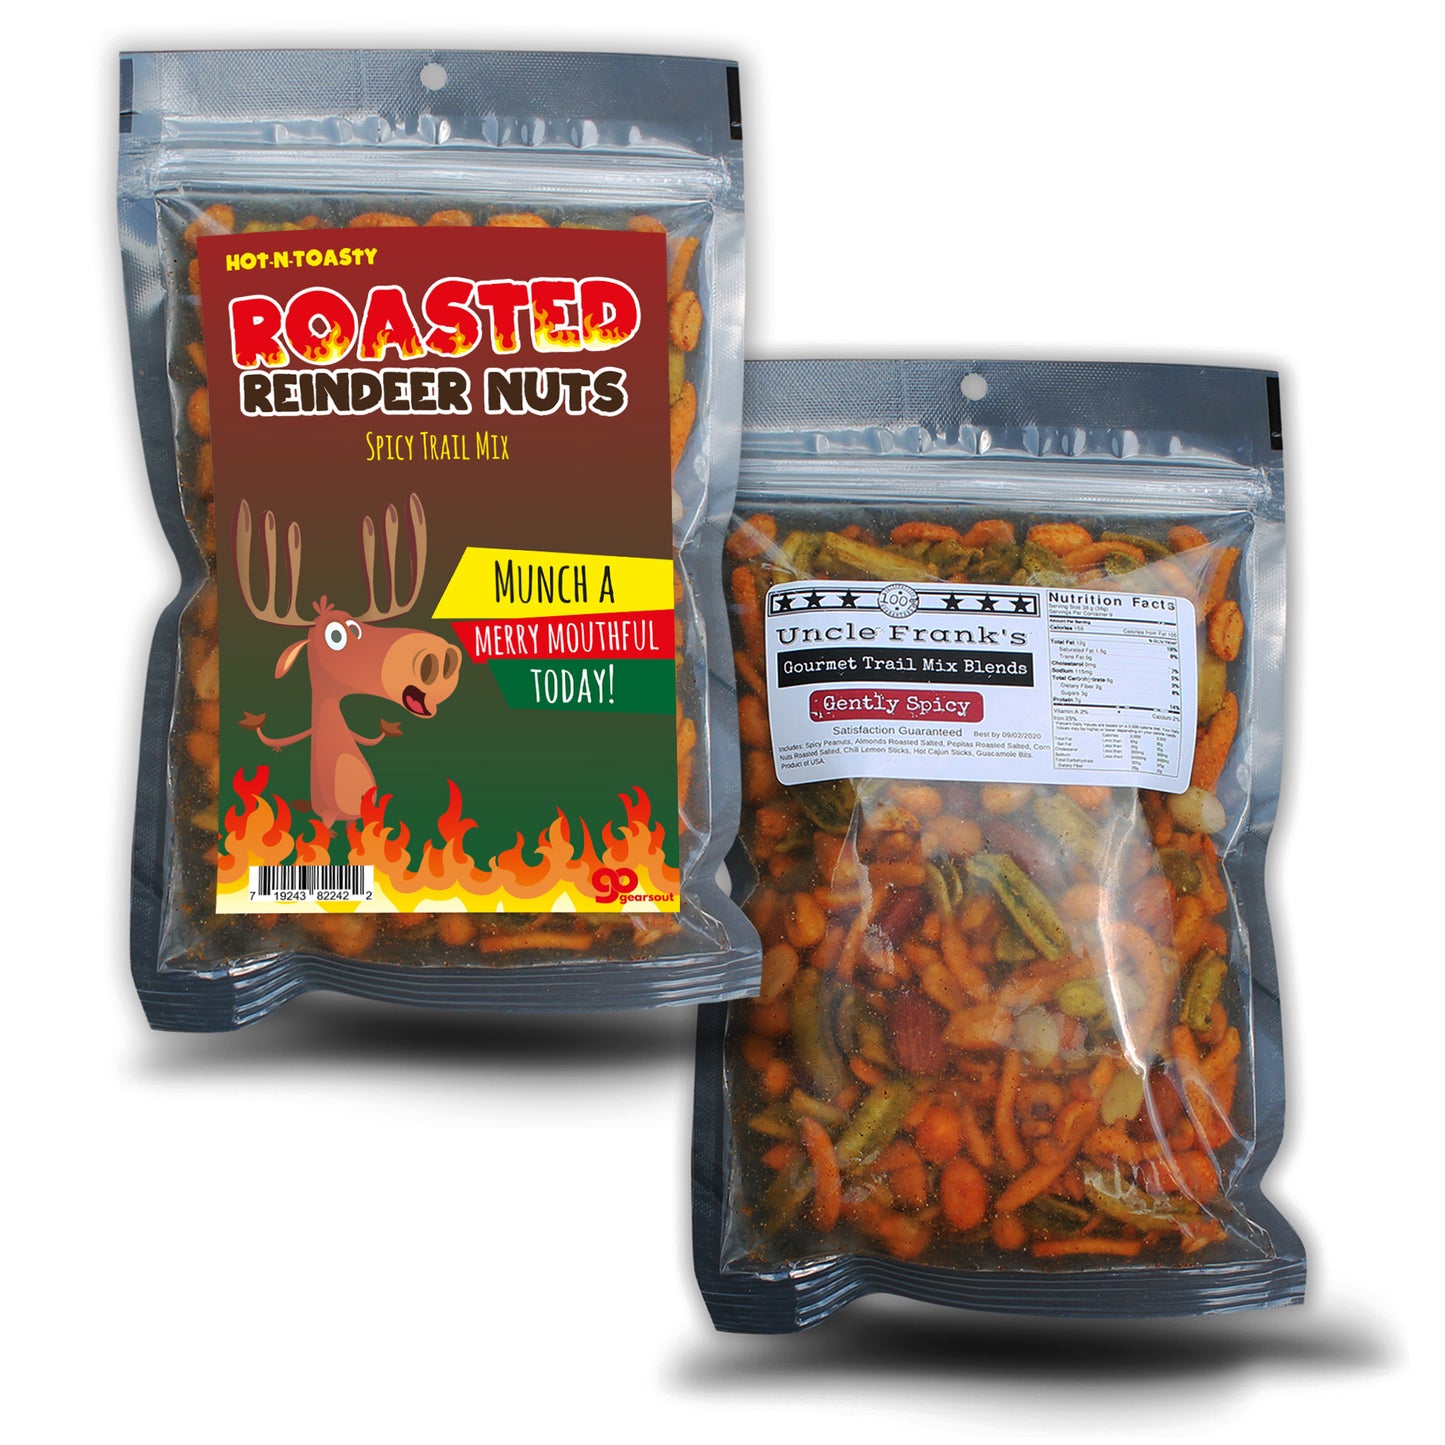 Roasted Reindeer Nuts Spicy Trail Mix